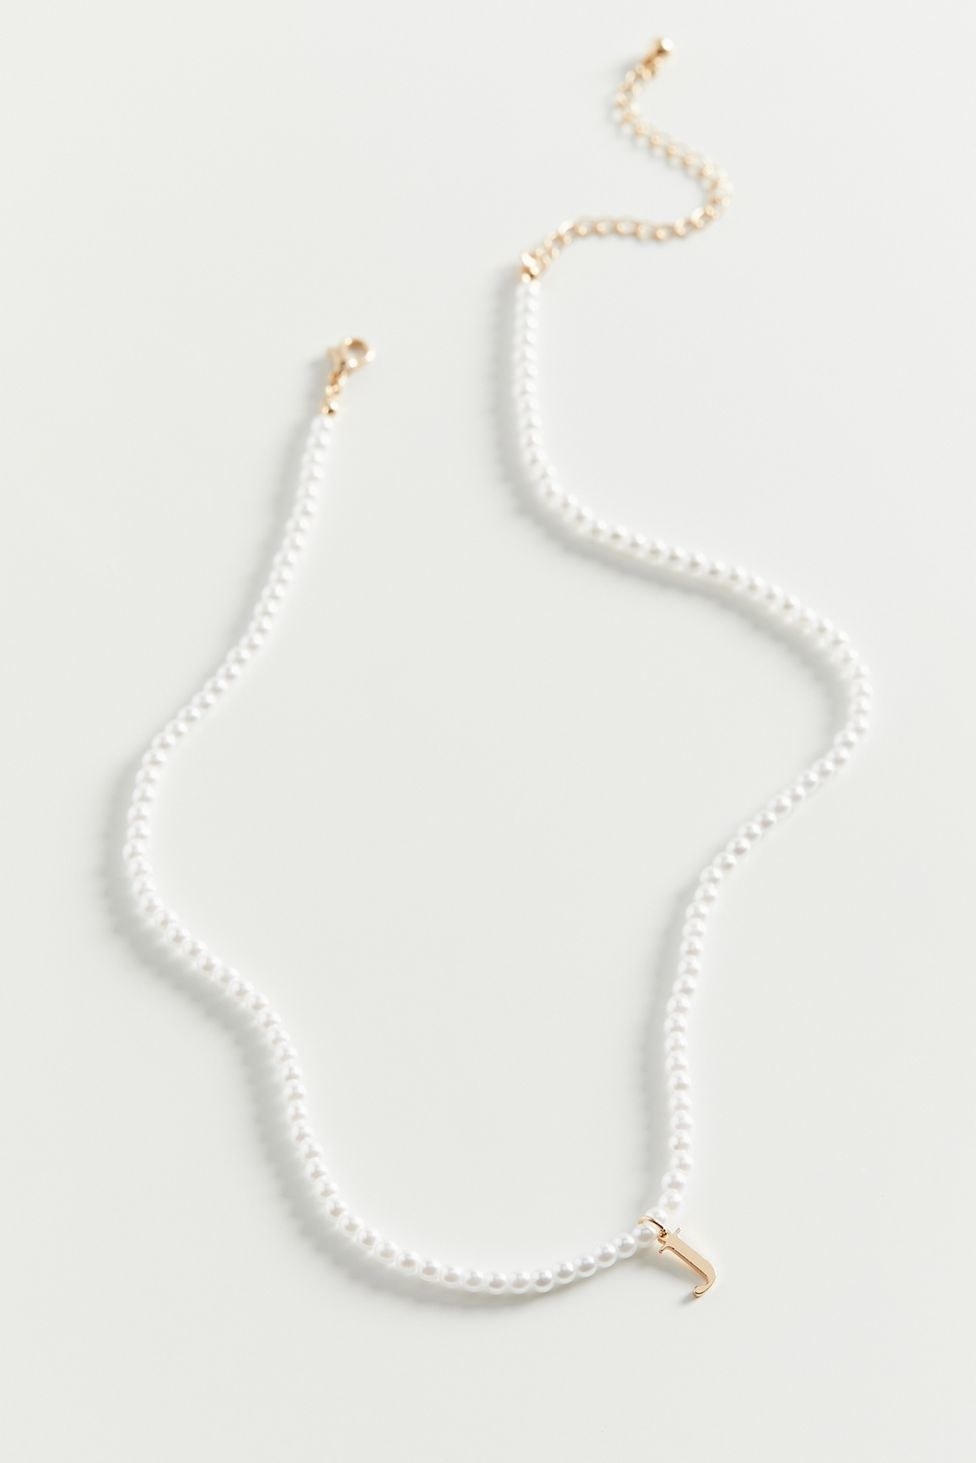 pearl necklace with a gold J charm